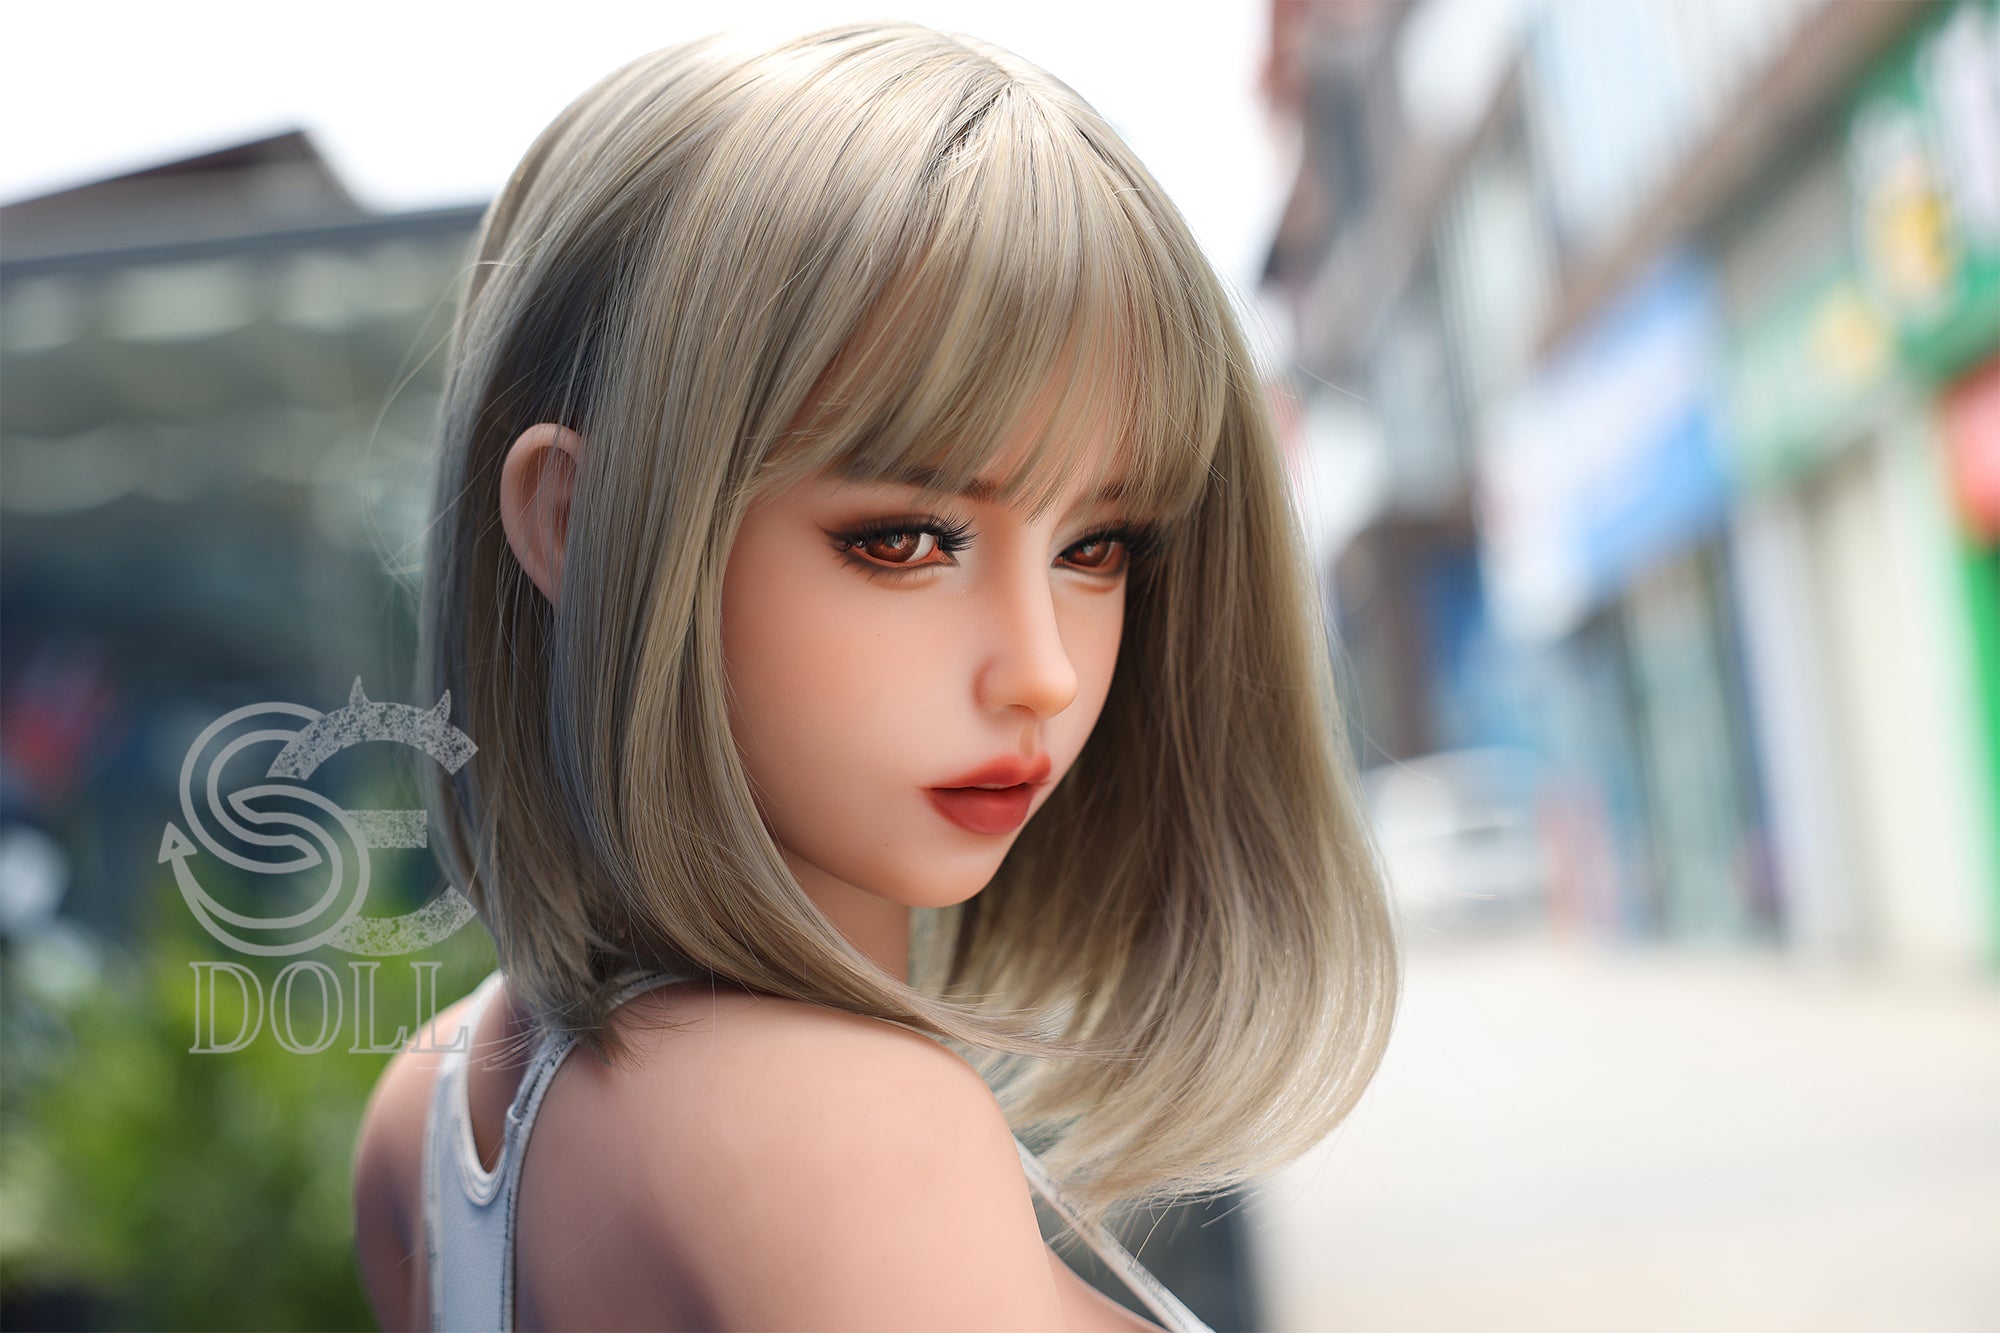 SEDOLL 161 cm F TPE - Melody | Buy Sex Dolls at DOLLS ACTUALLY